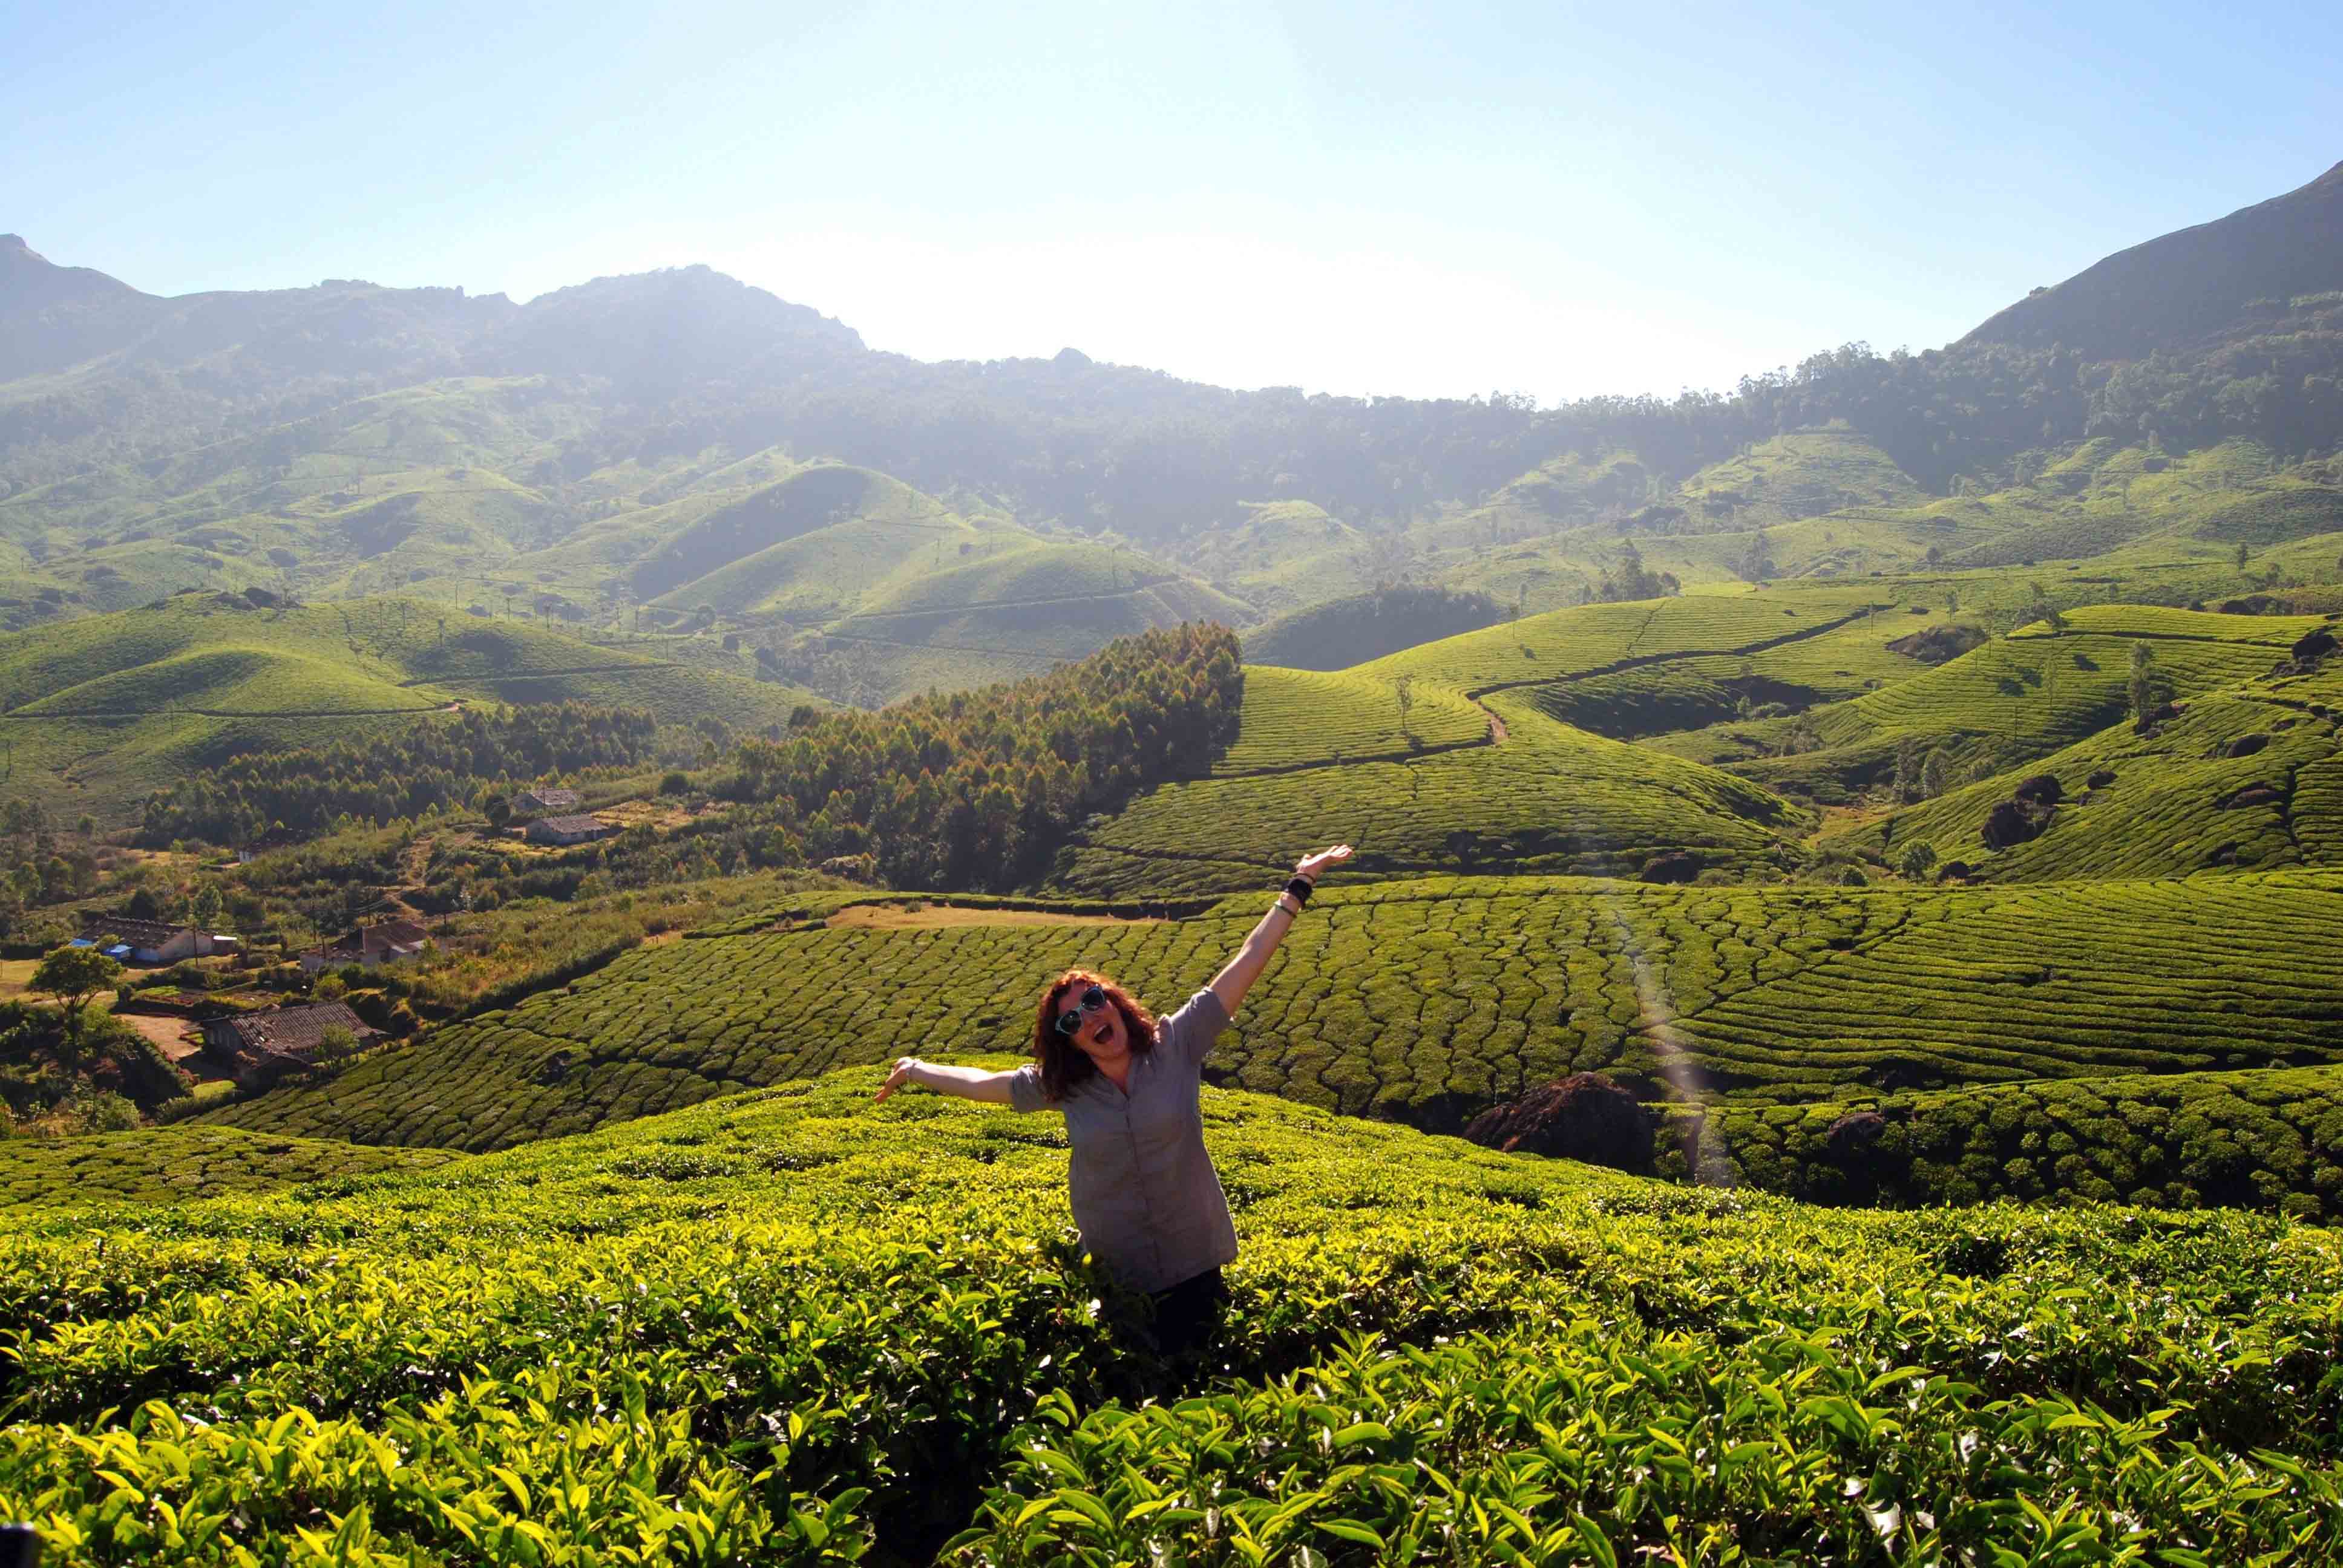 A student standing in the tea fields of Bengaluru, India.